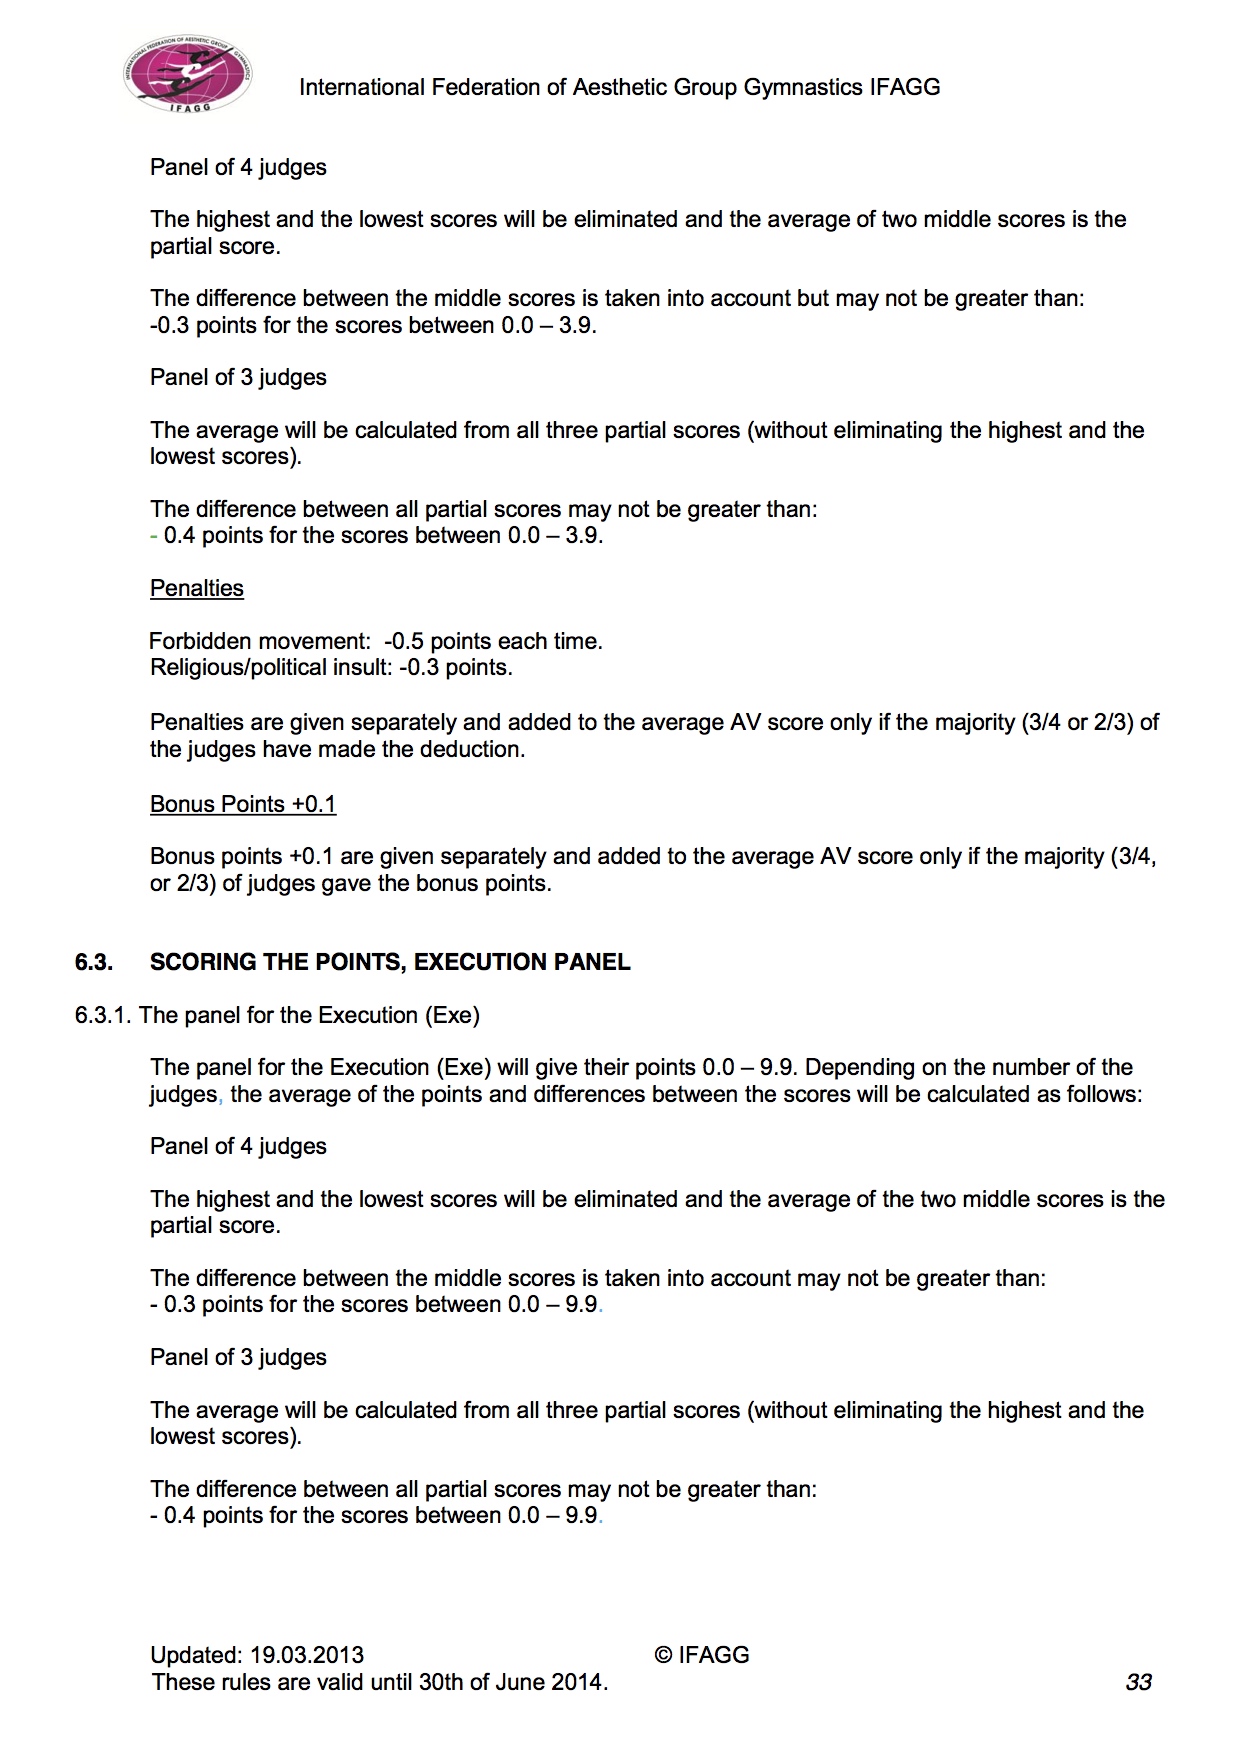 IFAGG Competition rules33.jpg